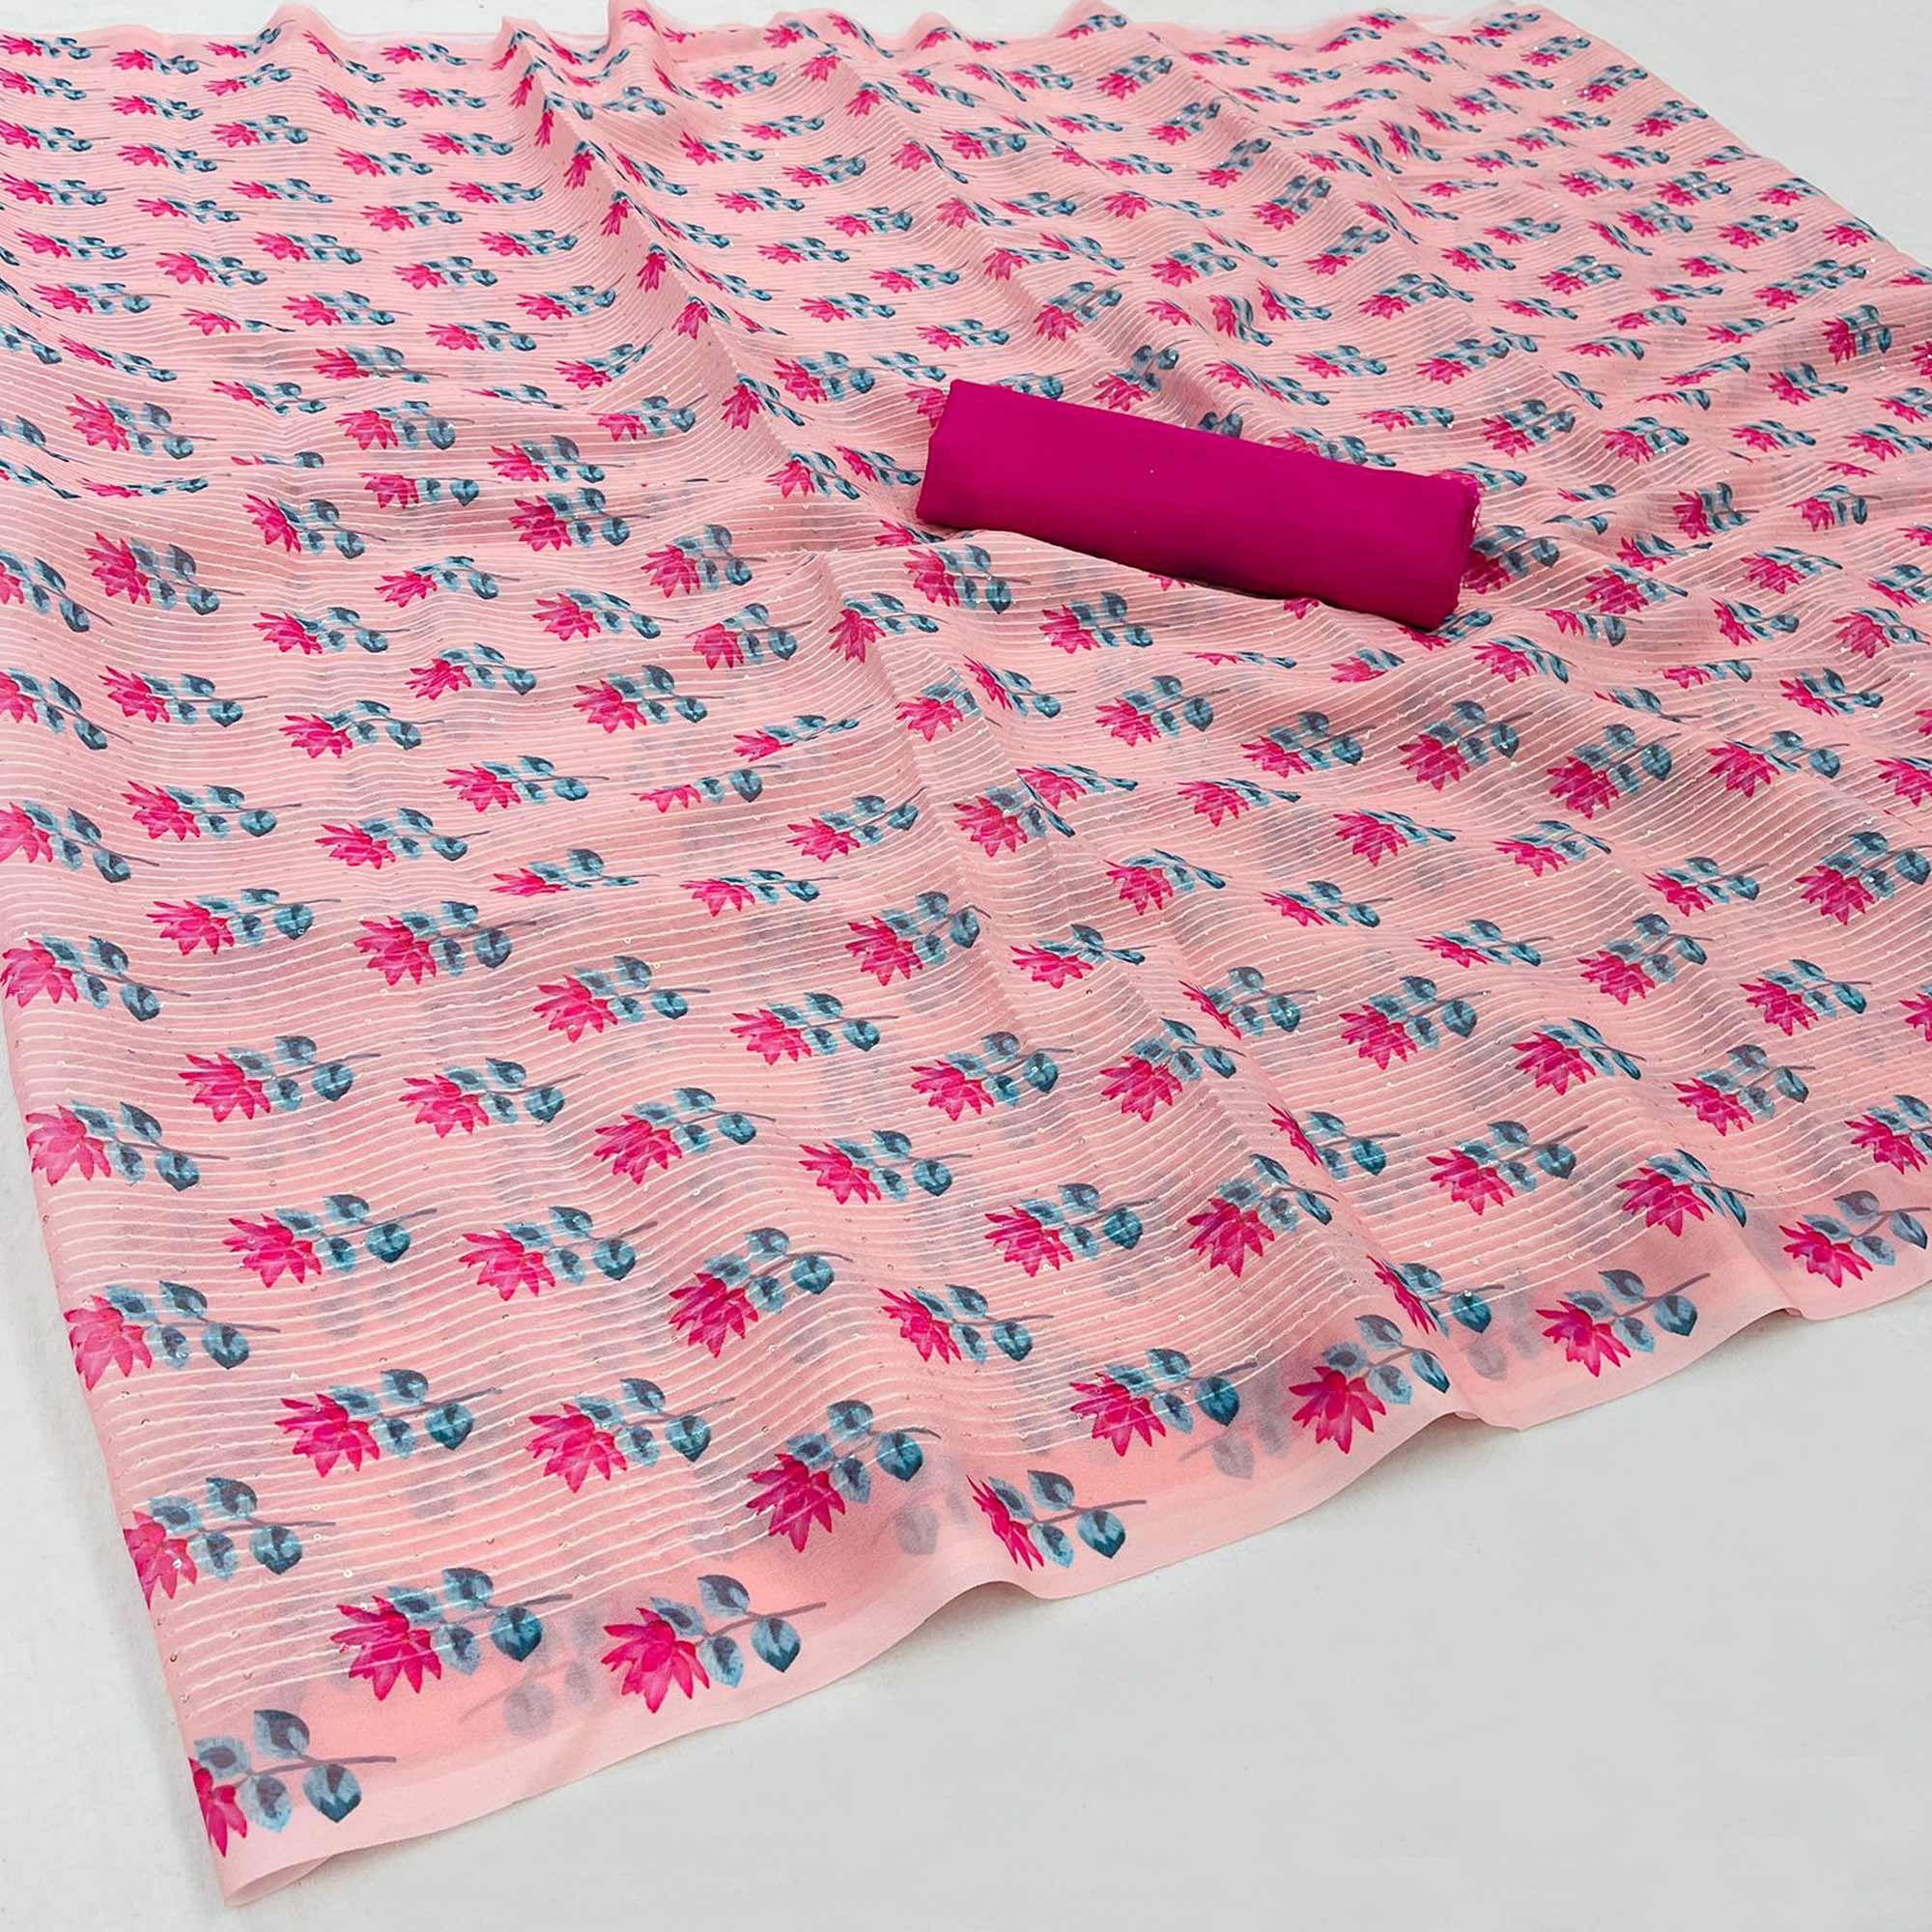 Pink Festive Wear Floral Printed With Embellished Georgette Saree - Peachmode